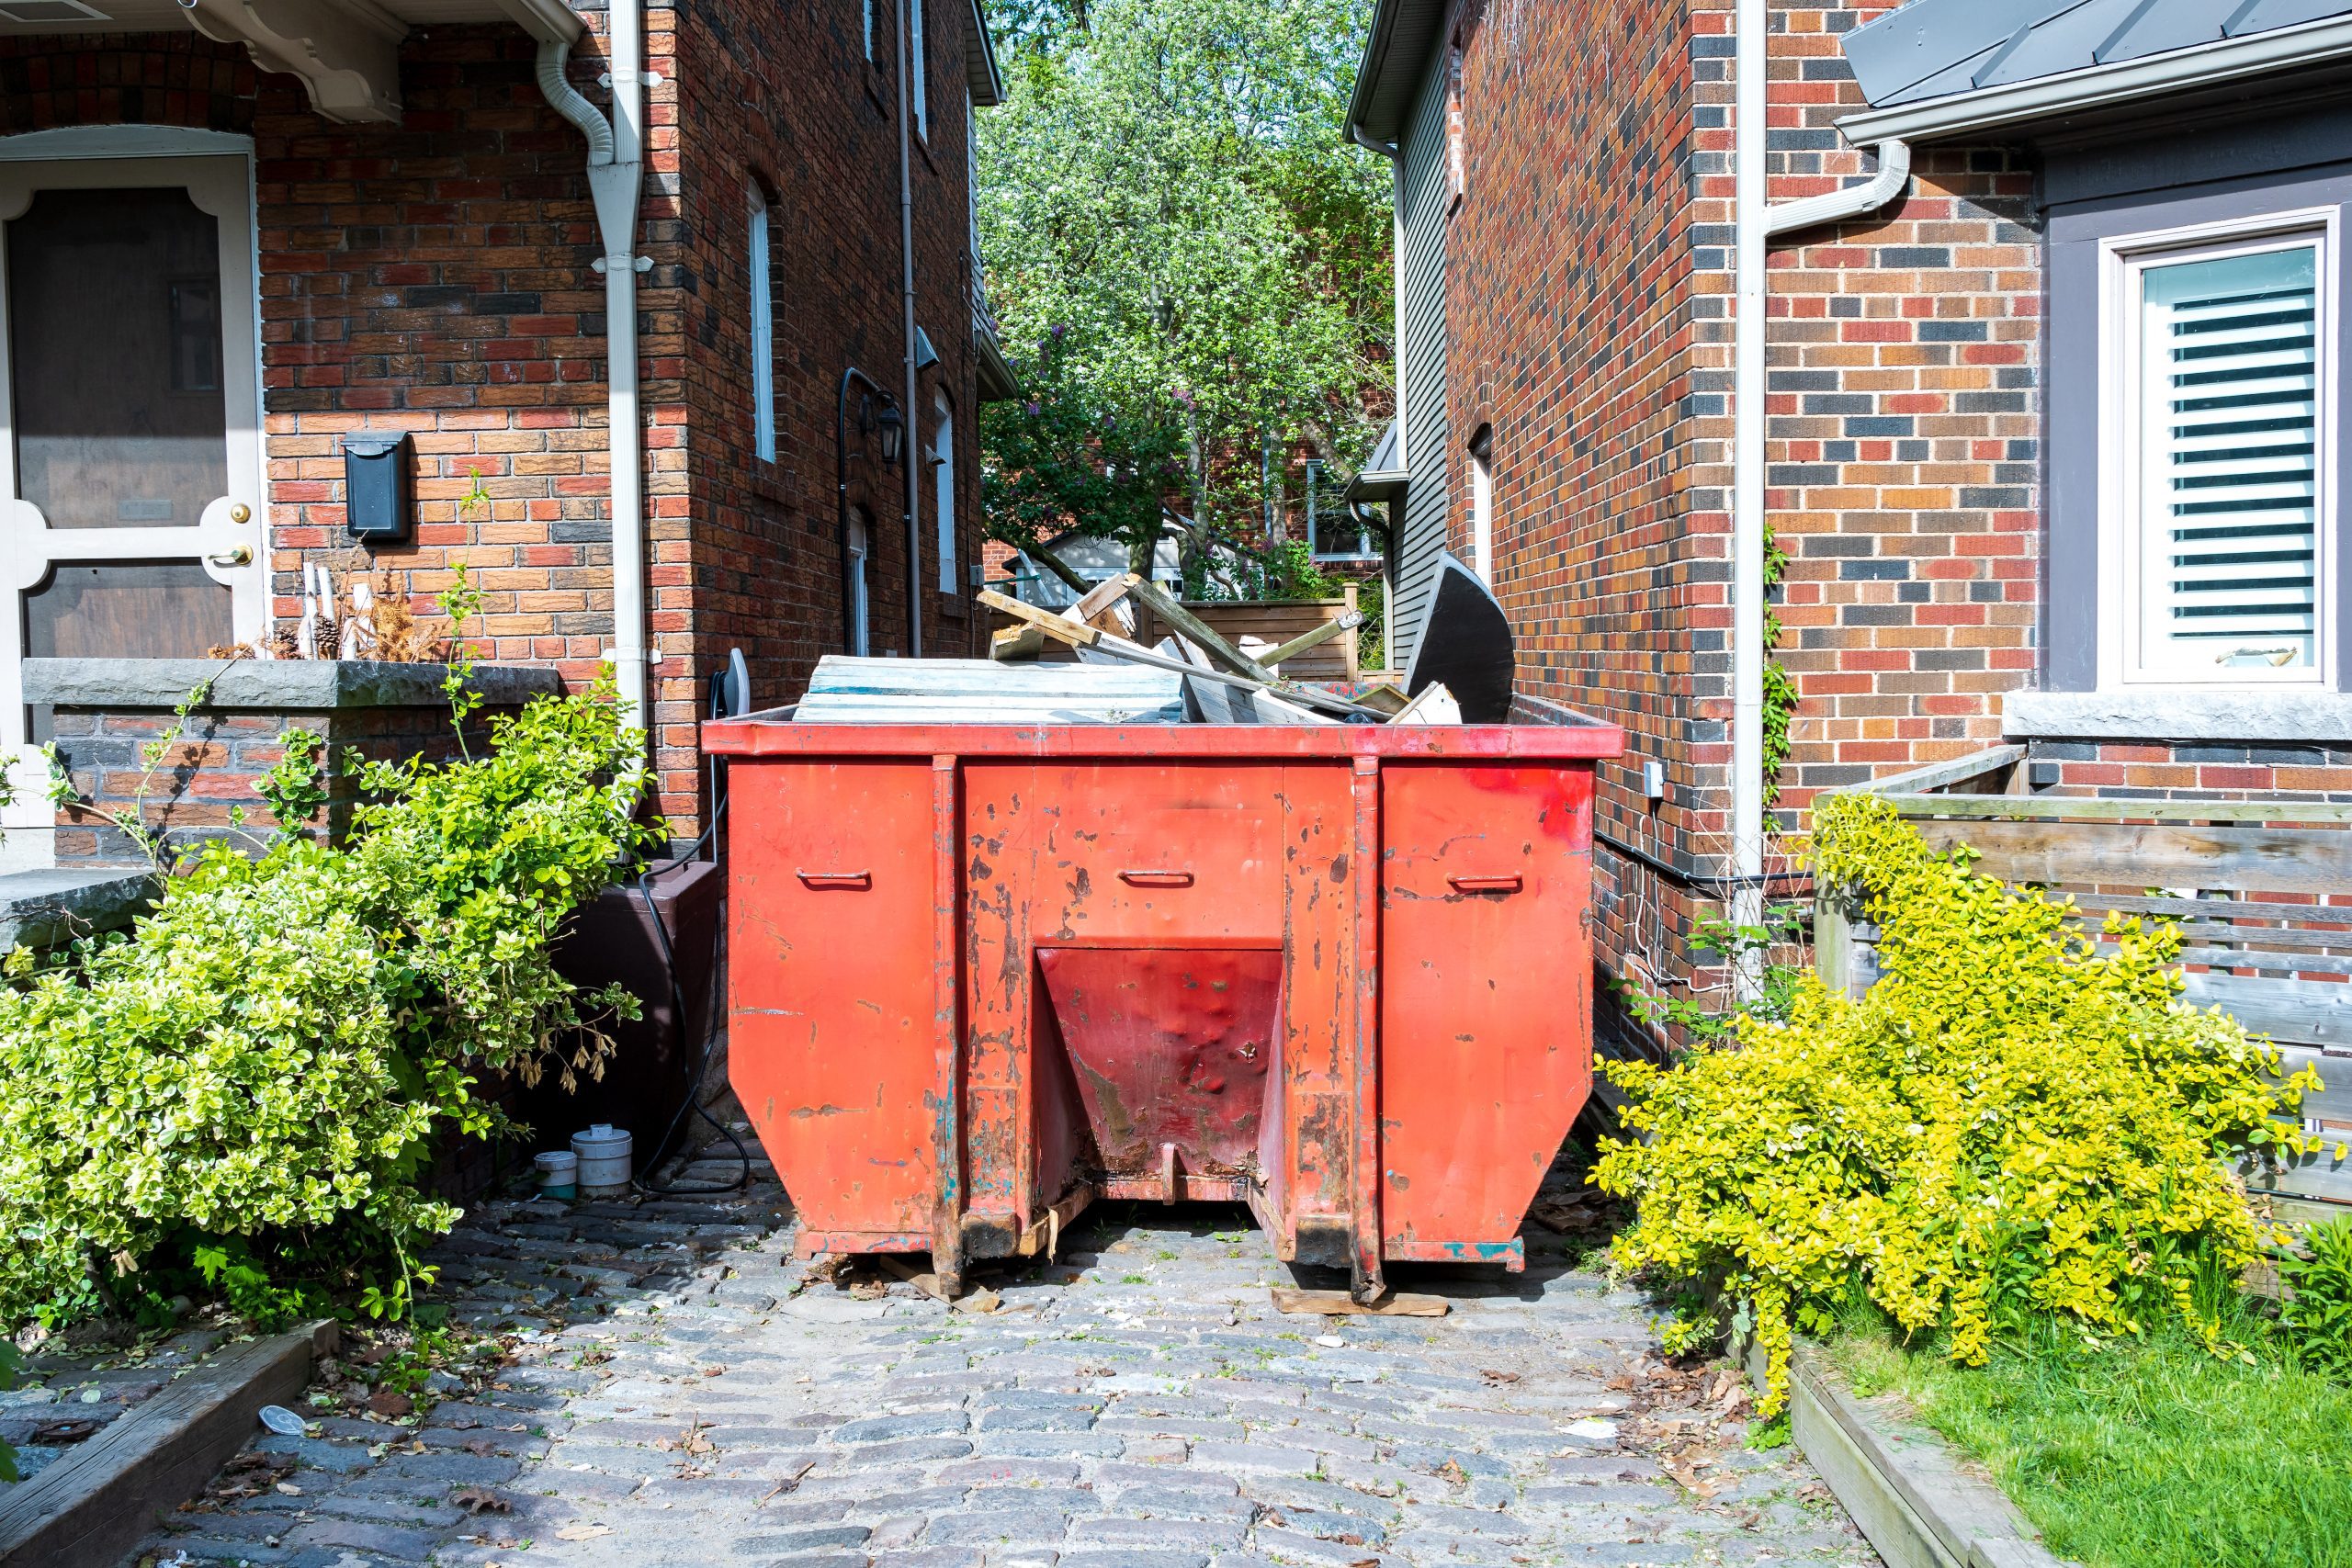 What areas does The Junk Guys serve for spring cleaning junk removal? - faq - The Junk Guys